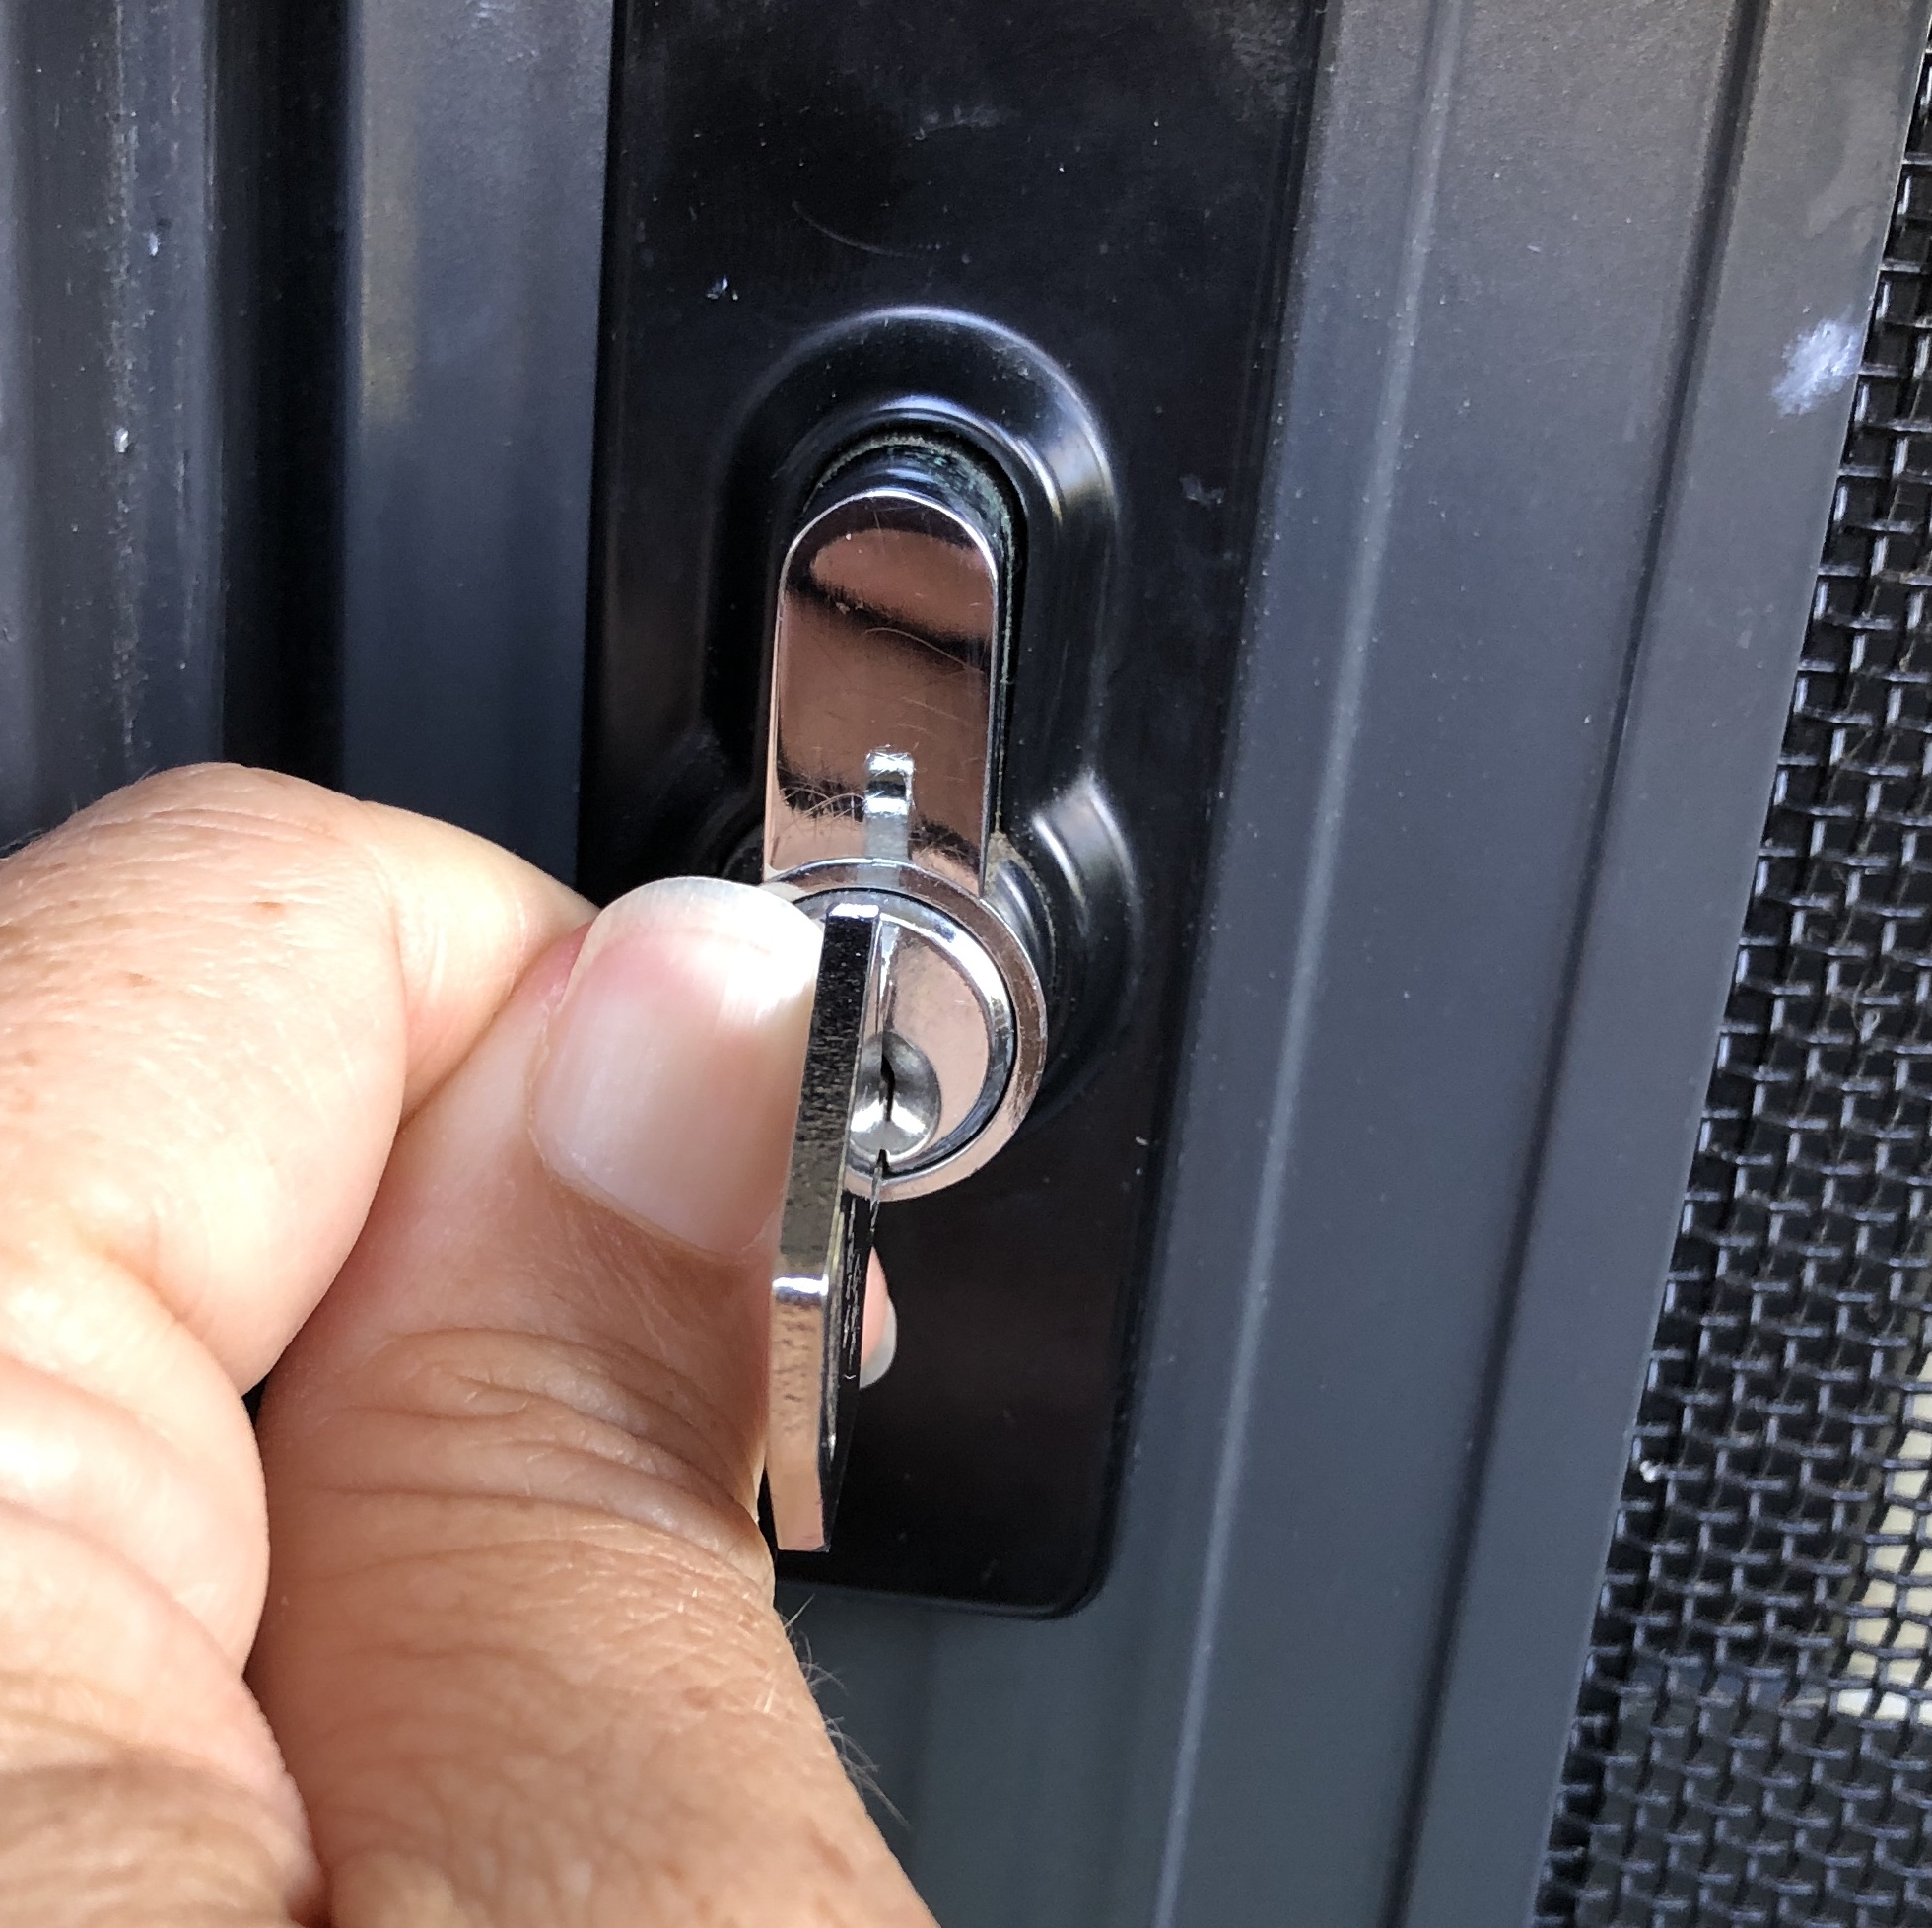 How To Get A Key Out Of A Lock How to get a stuck key out of a lock - SP Screens